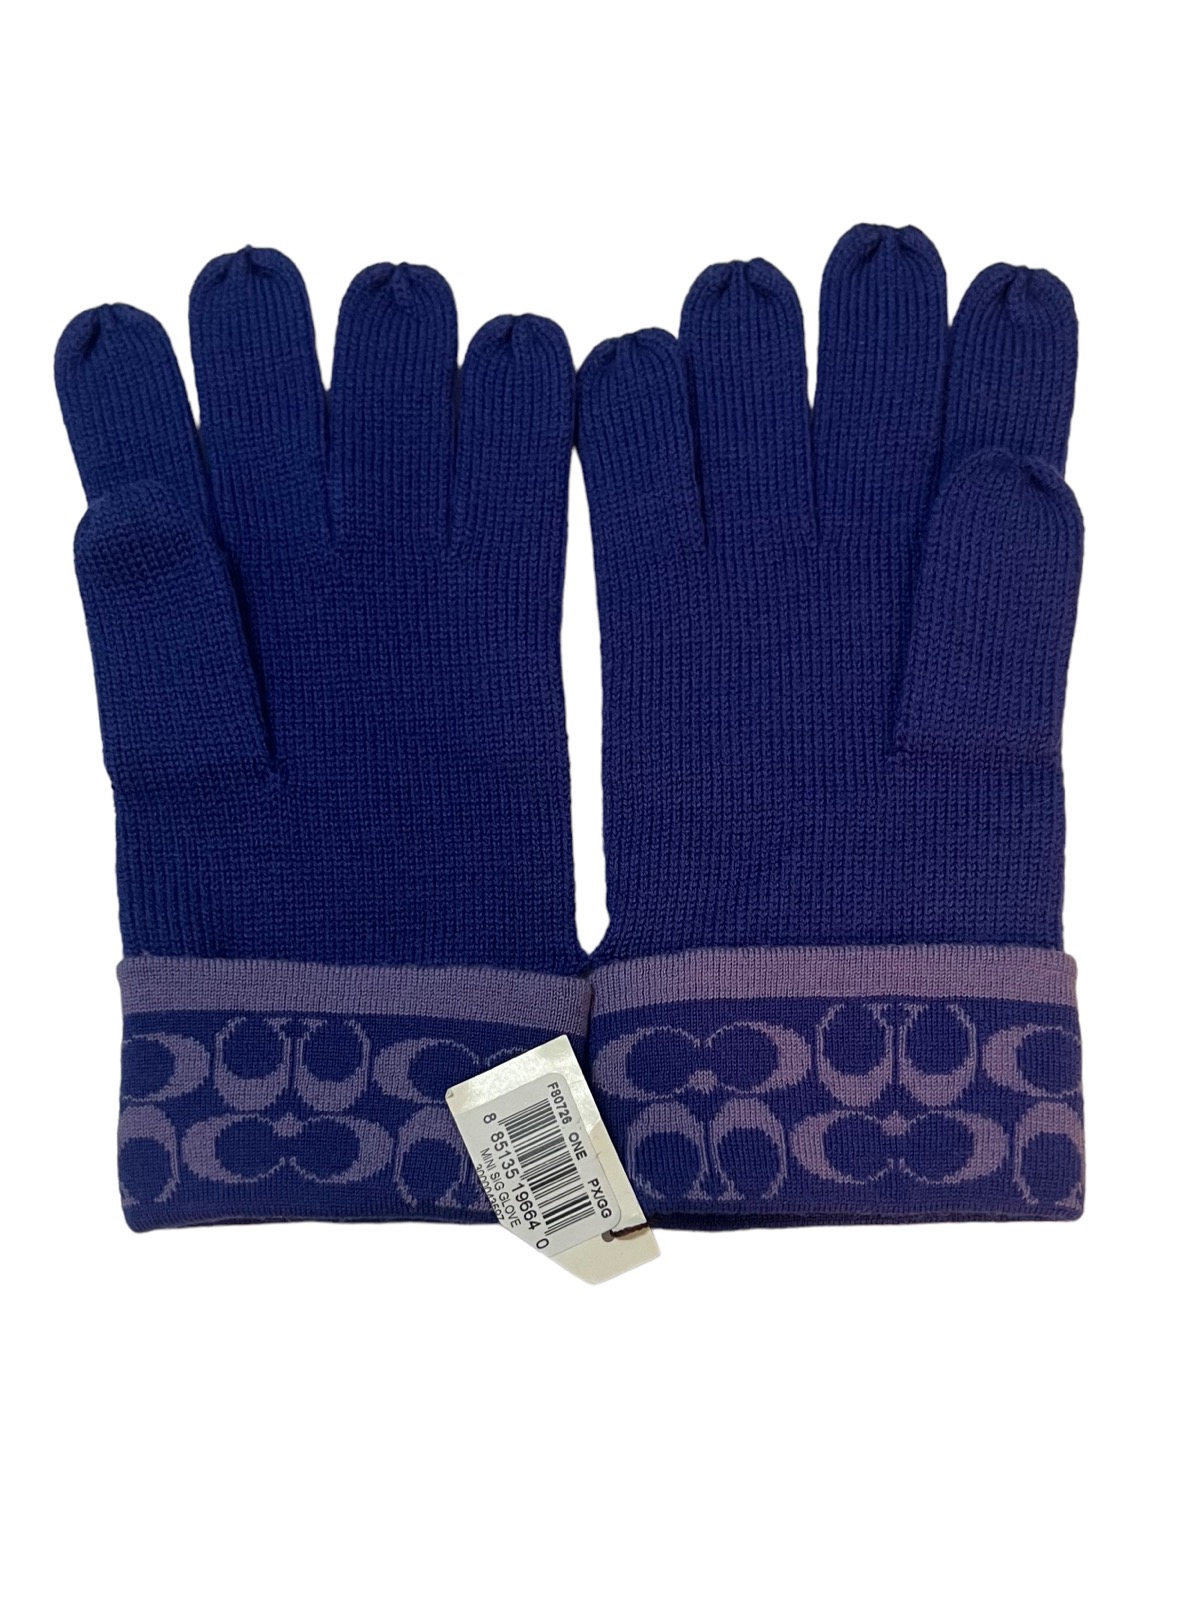 Coach - COACH ( NEW OLD STOCK ) (NOS) SIGNATURE KNIT TECH GLOVES - 3